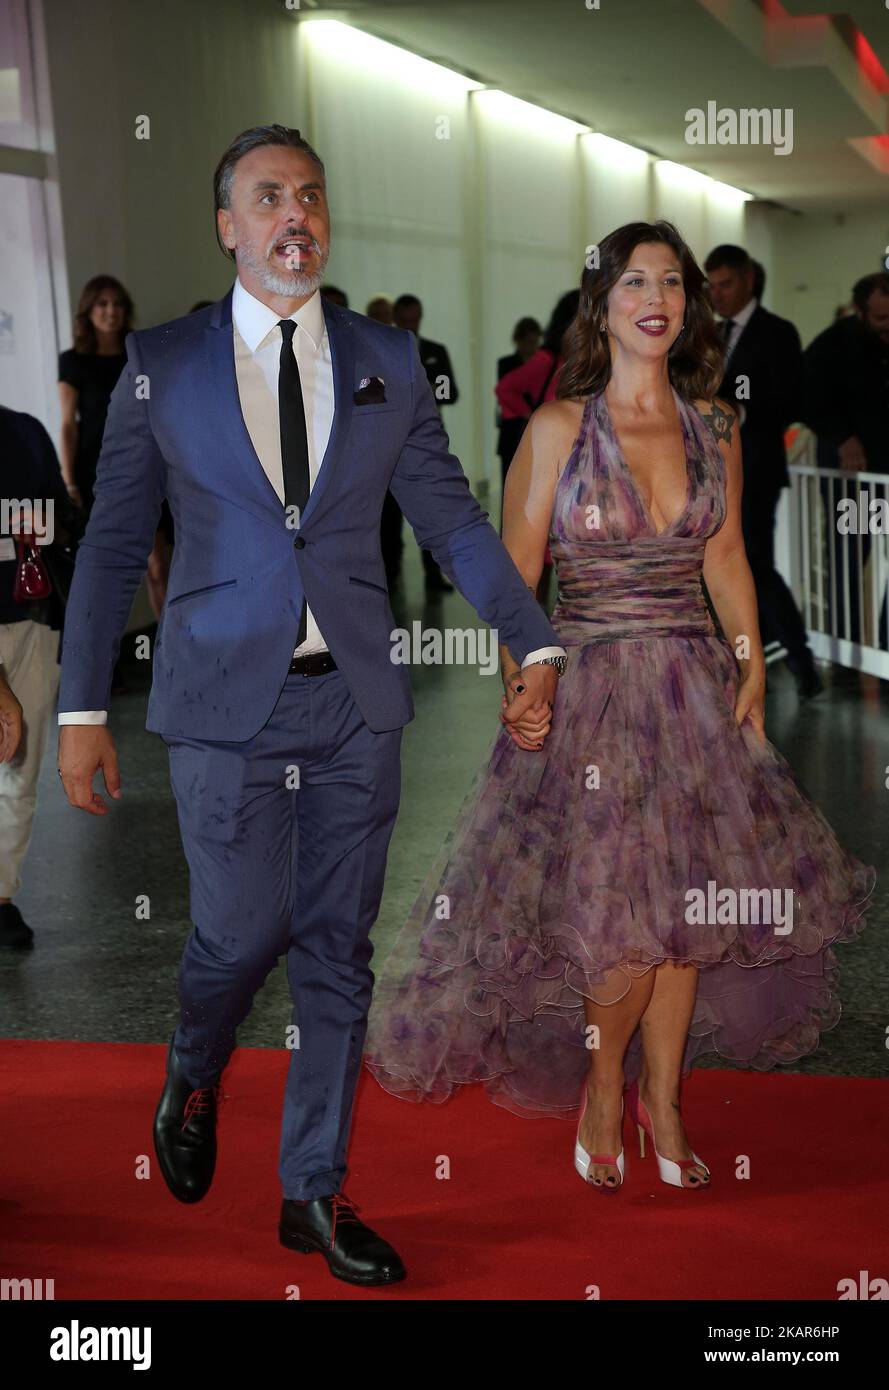 Venice, Italy. 07 September, 2017: Michela Andreozzi and Massimiliano Vado walks the red carpet ahead of the 'Mektoub, My Love: Canto Uno' screening during the 74th Venice Film Festival (Photo by Matteo Chinellato/NurPhoto) Stock Photo